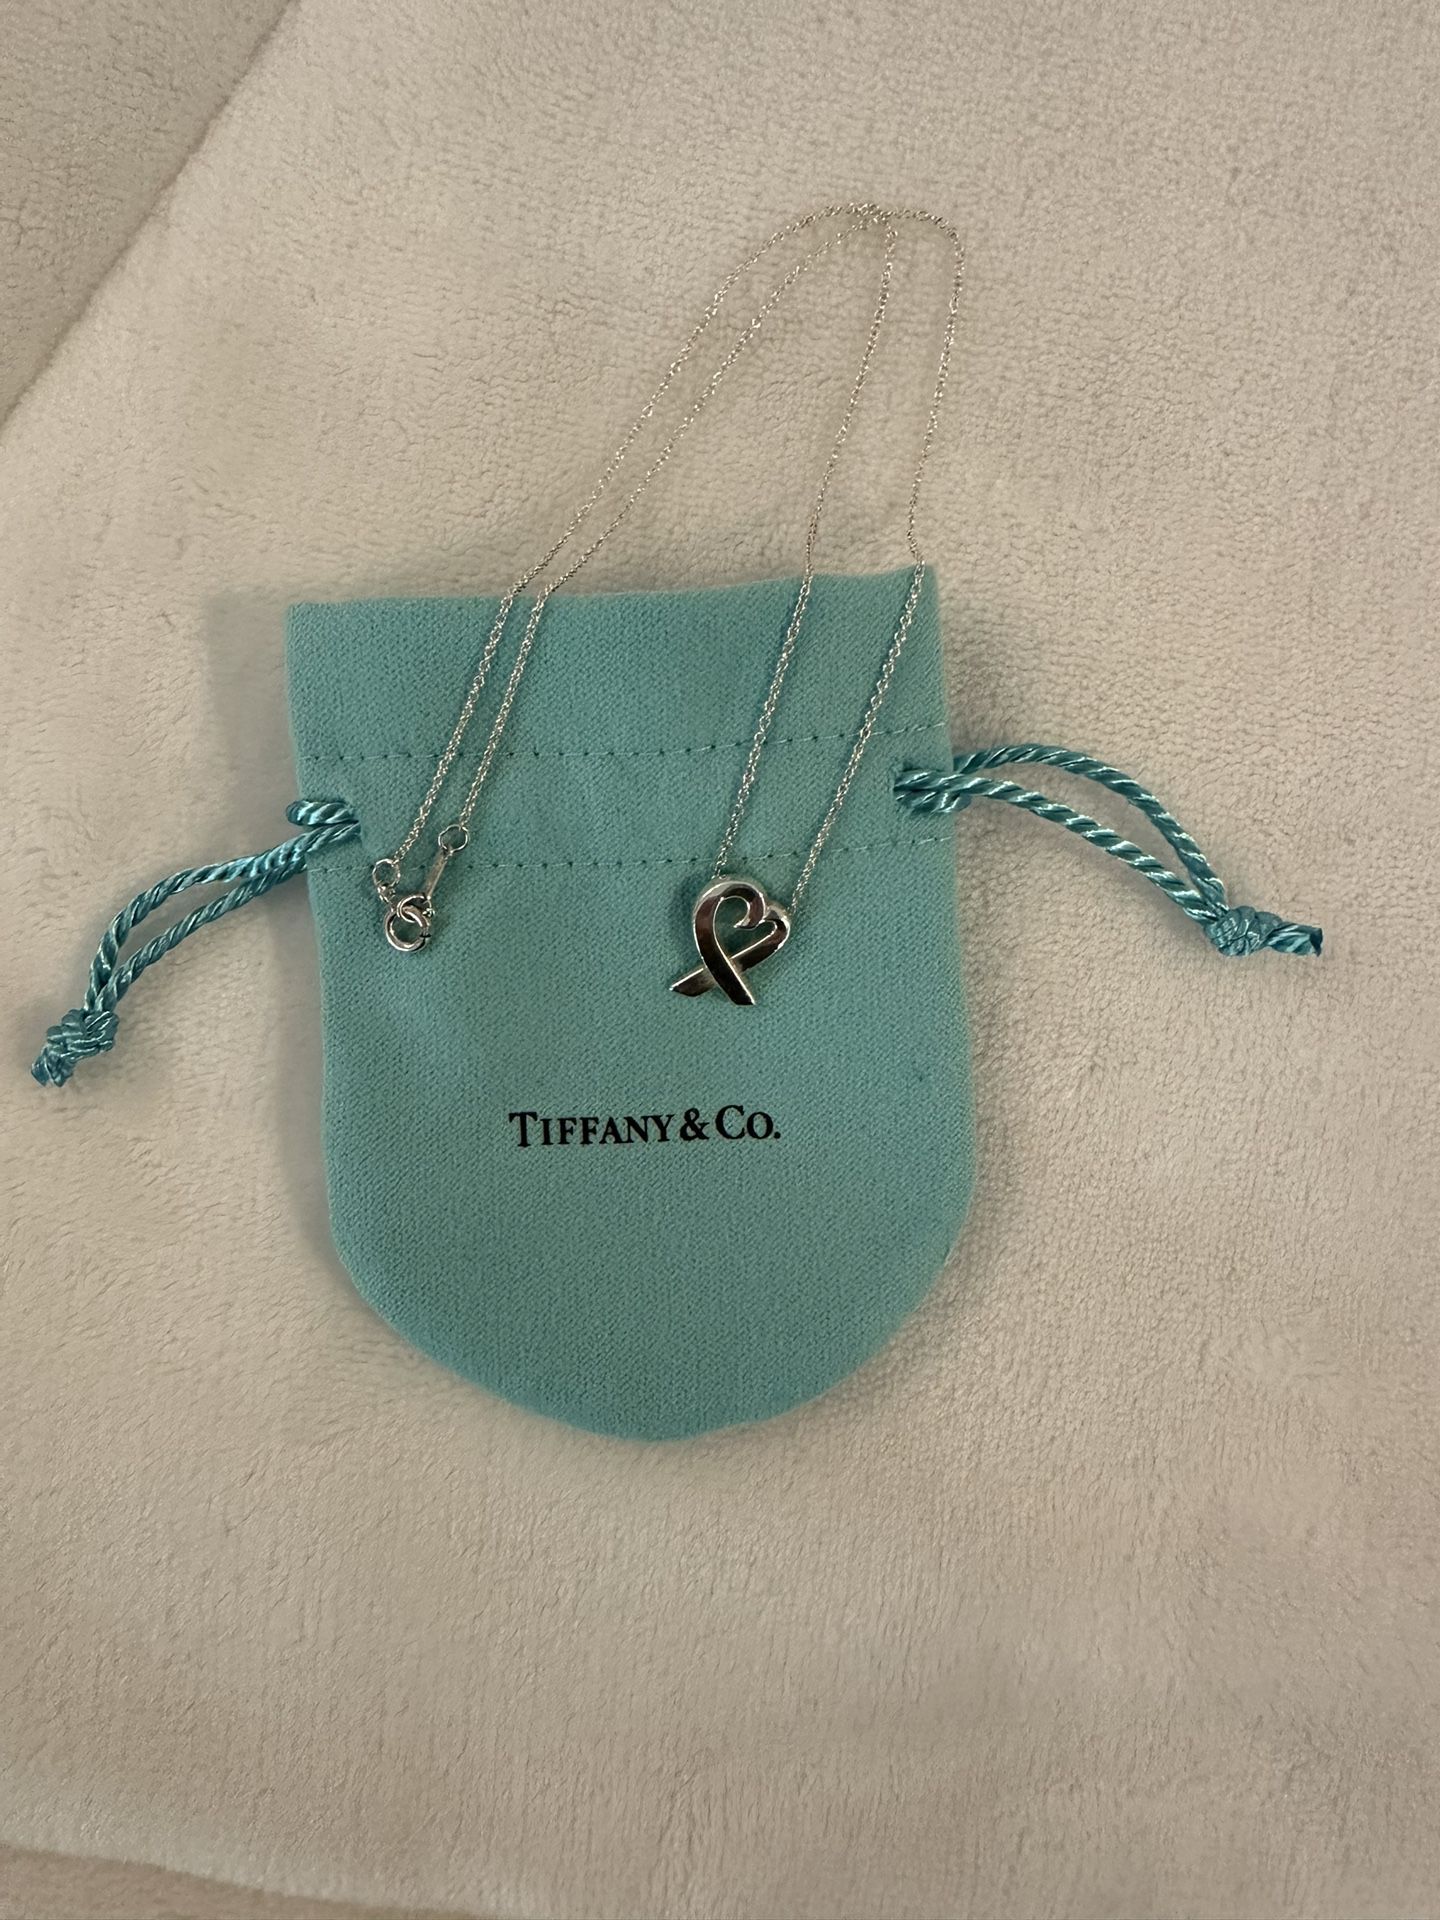 Tiffany & Co Paloma Picasso Loving Heart Necklace - Perfect Condition